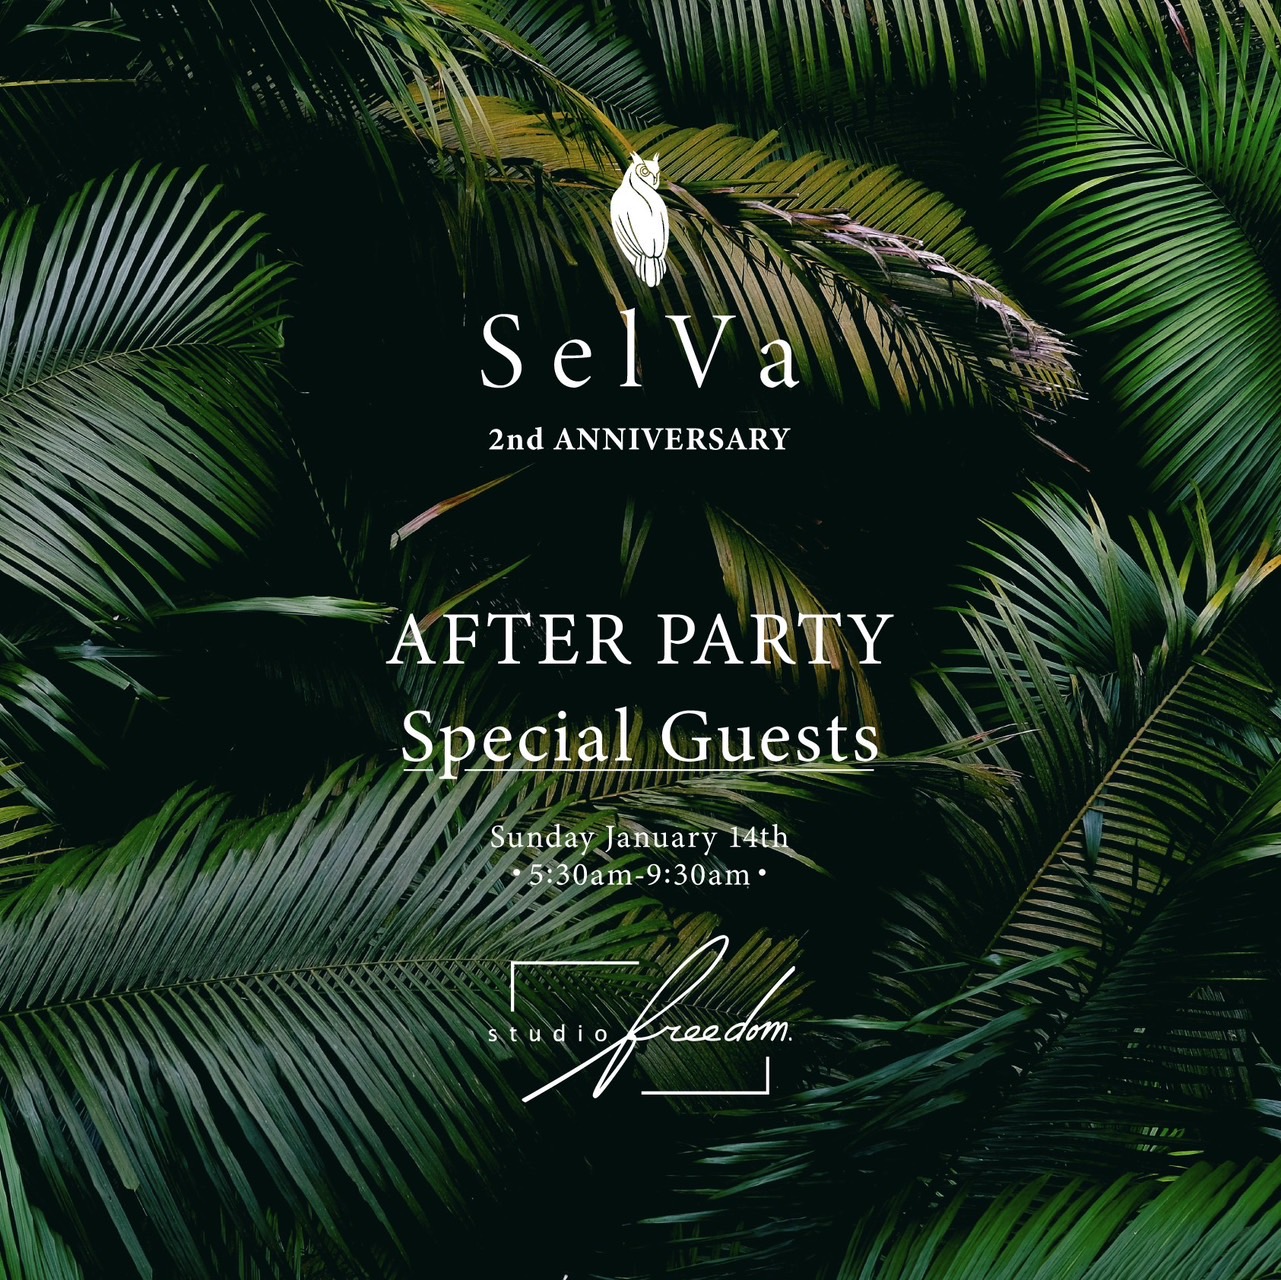 SelVa AFTER PARTY